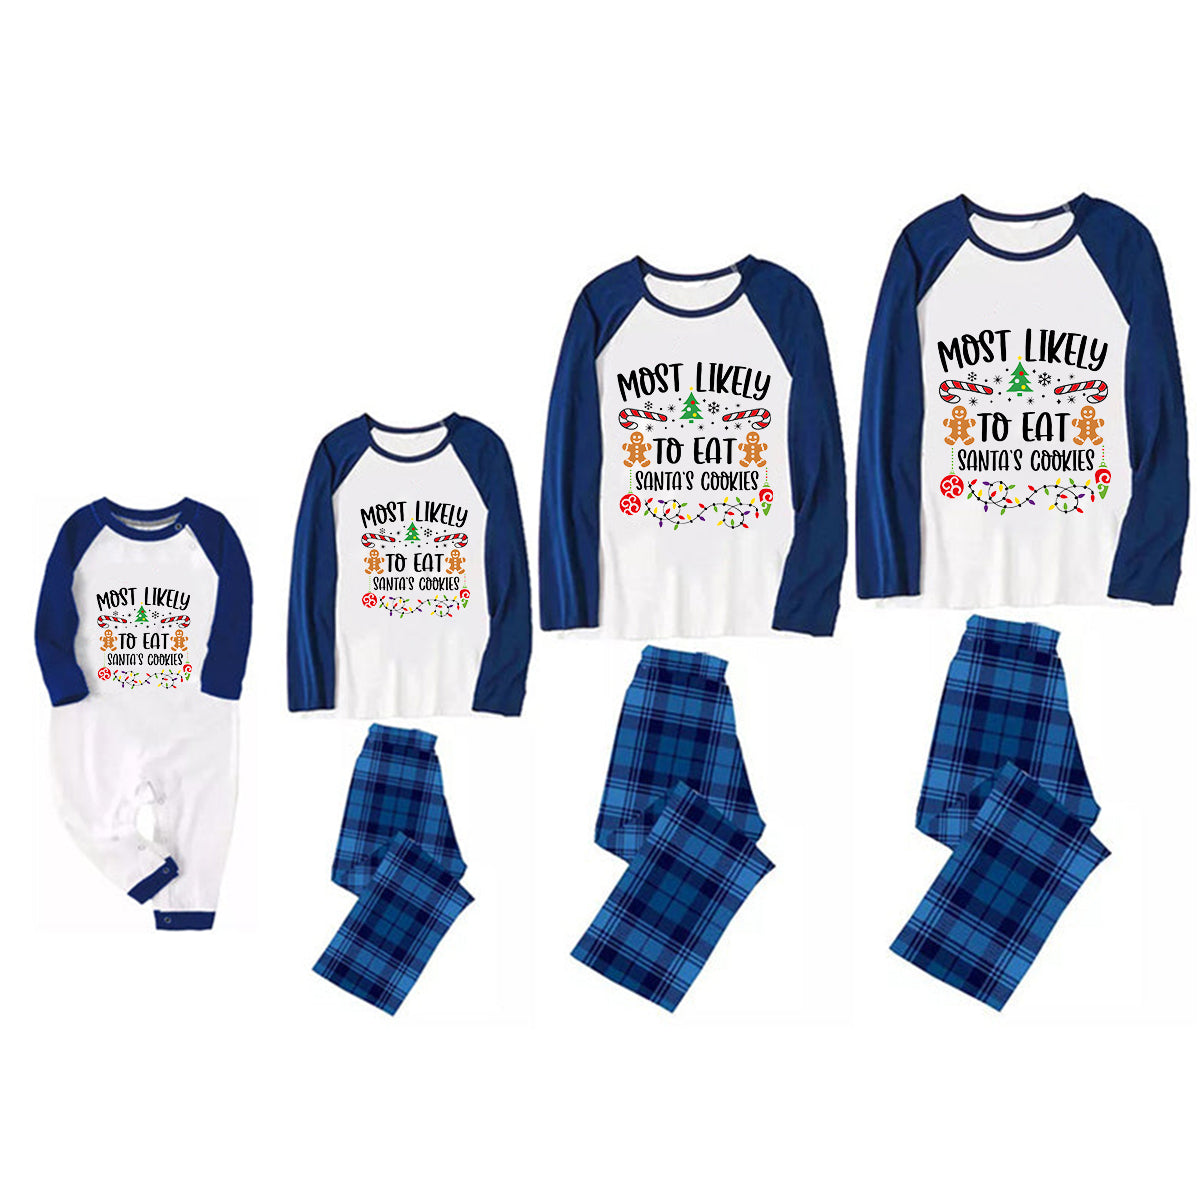 Family Christmas Shirts Christmas Cute Cartoon Christmas Tree and ''Most Likely to BE SWEET AS SUGAR COOKIES '' Letter Print Grey Casual Long Sleeve Sweatshirts Contrast Blue & White Top and Black and Blue Plaid Pants Family Matching Pajamas Sets